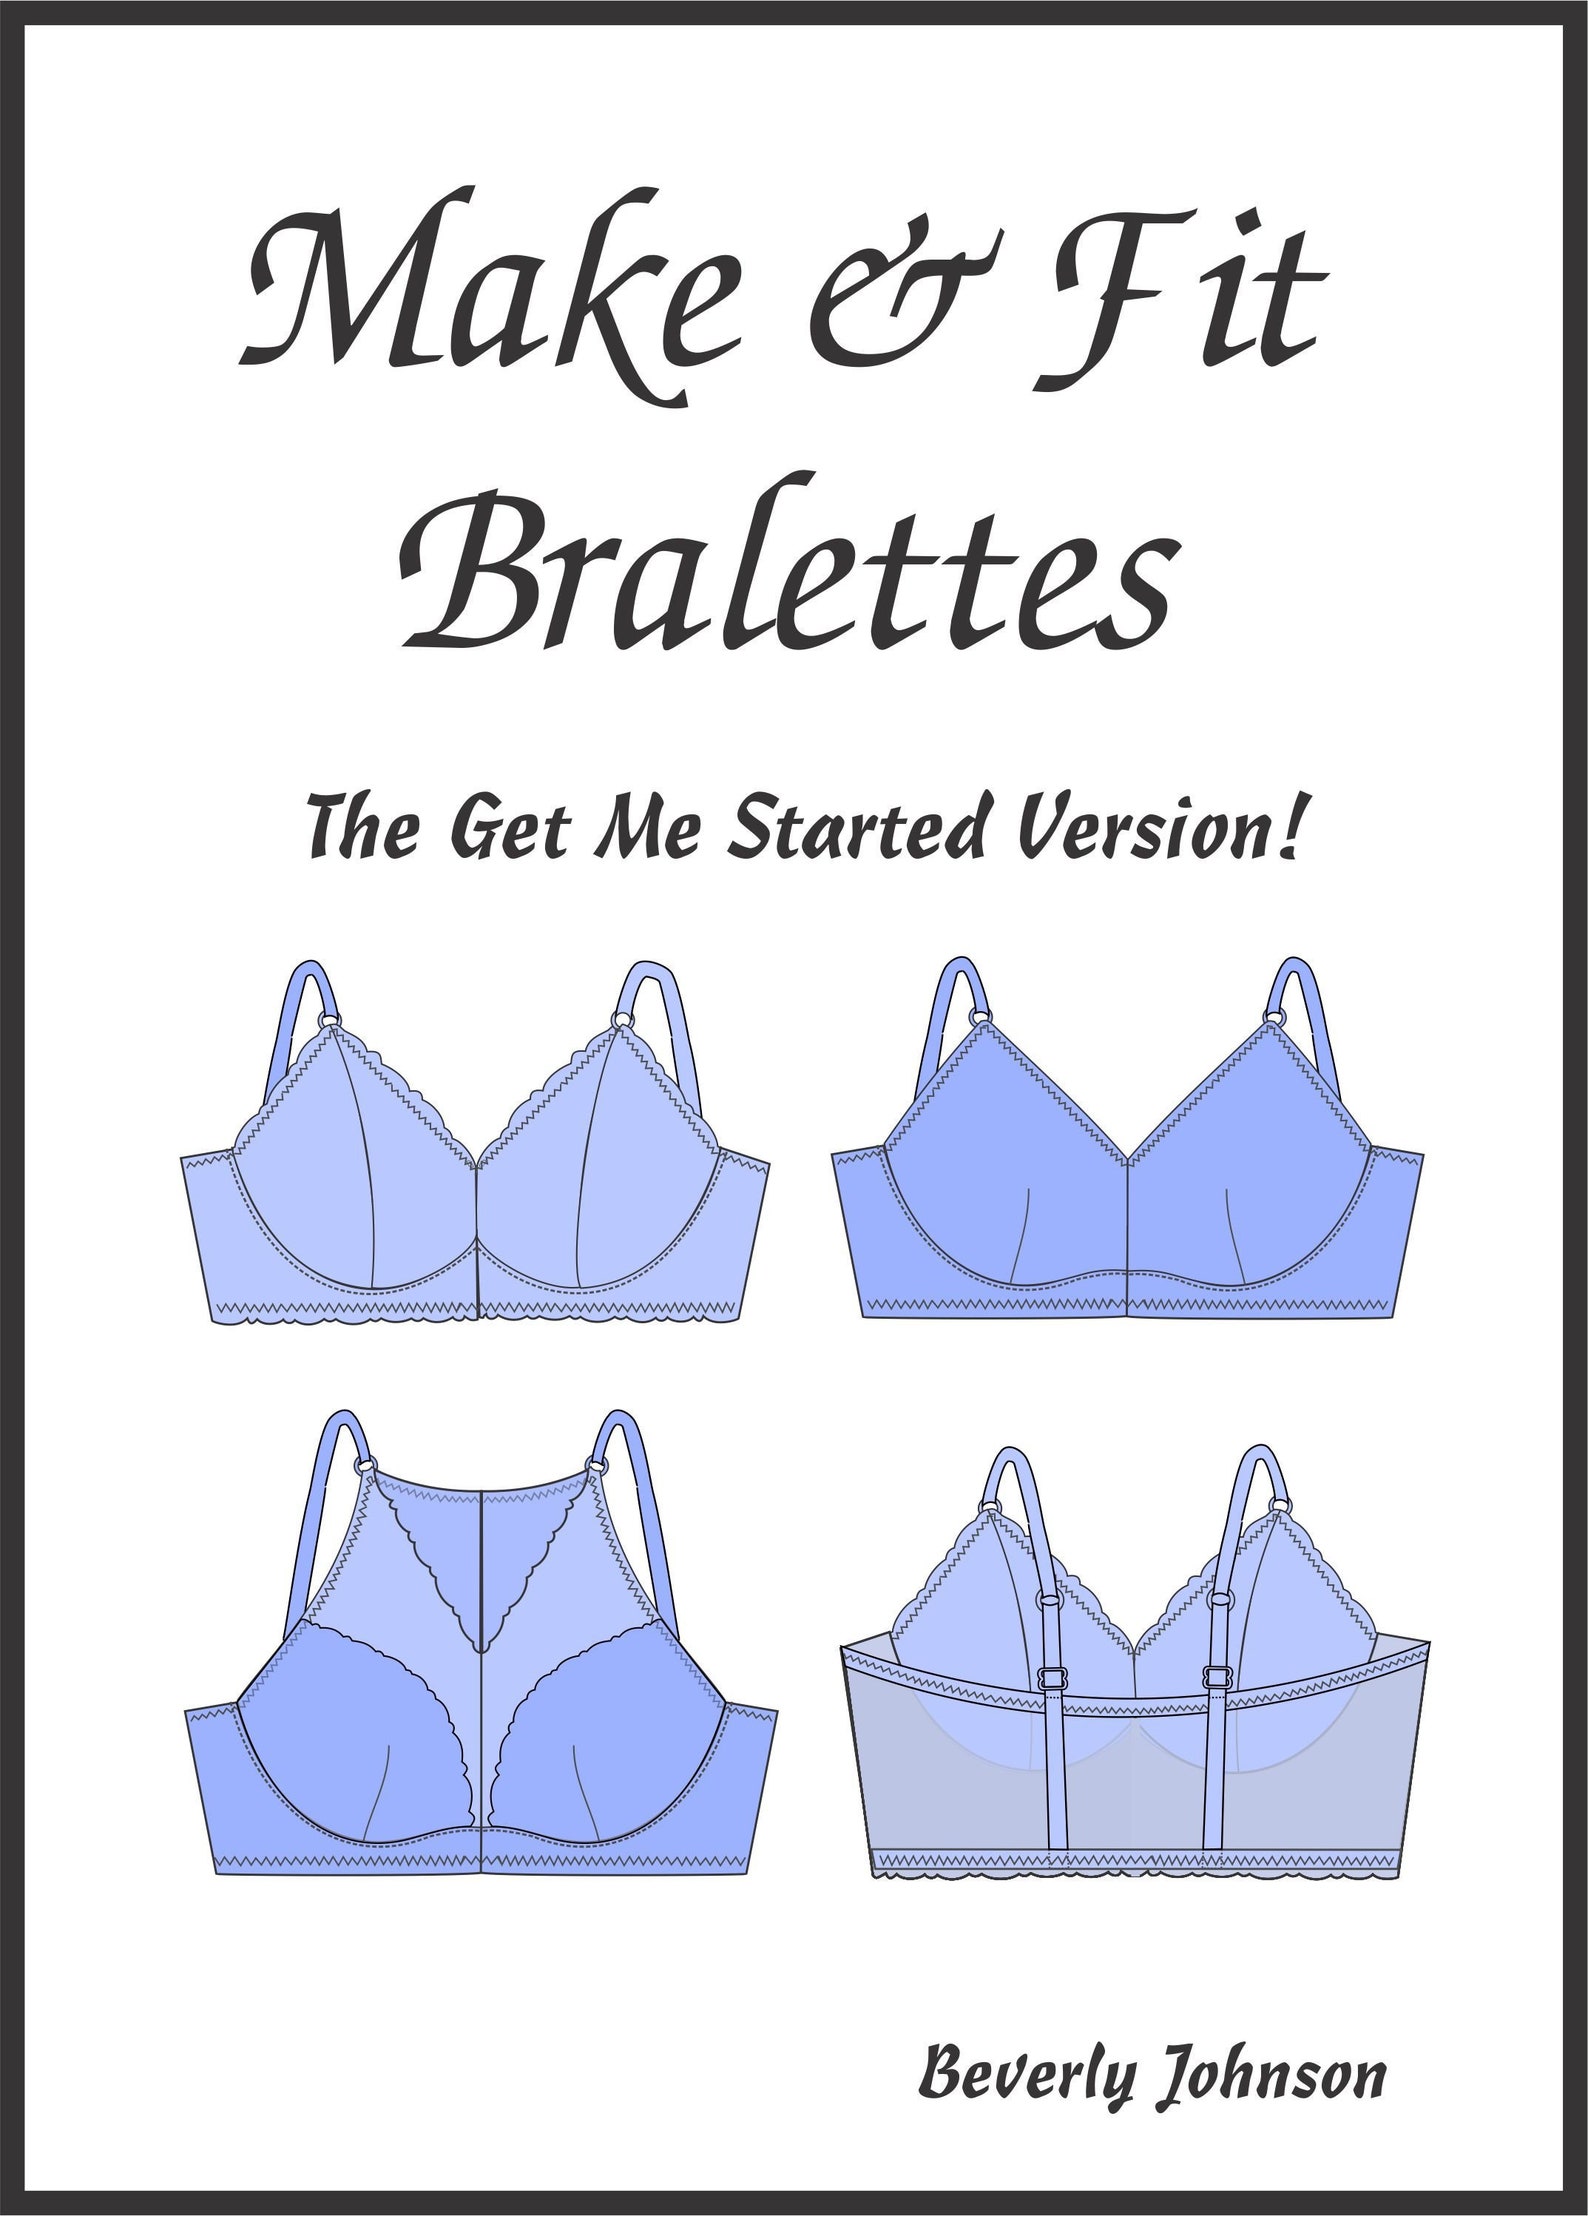 Your Guide to Bra and Lingerie Making Books